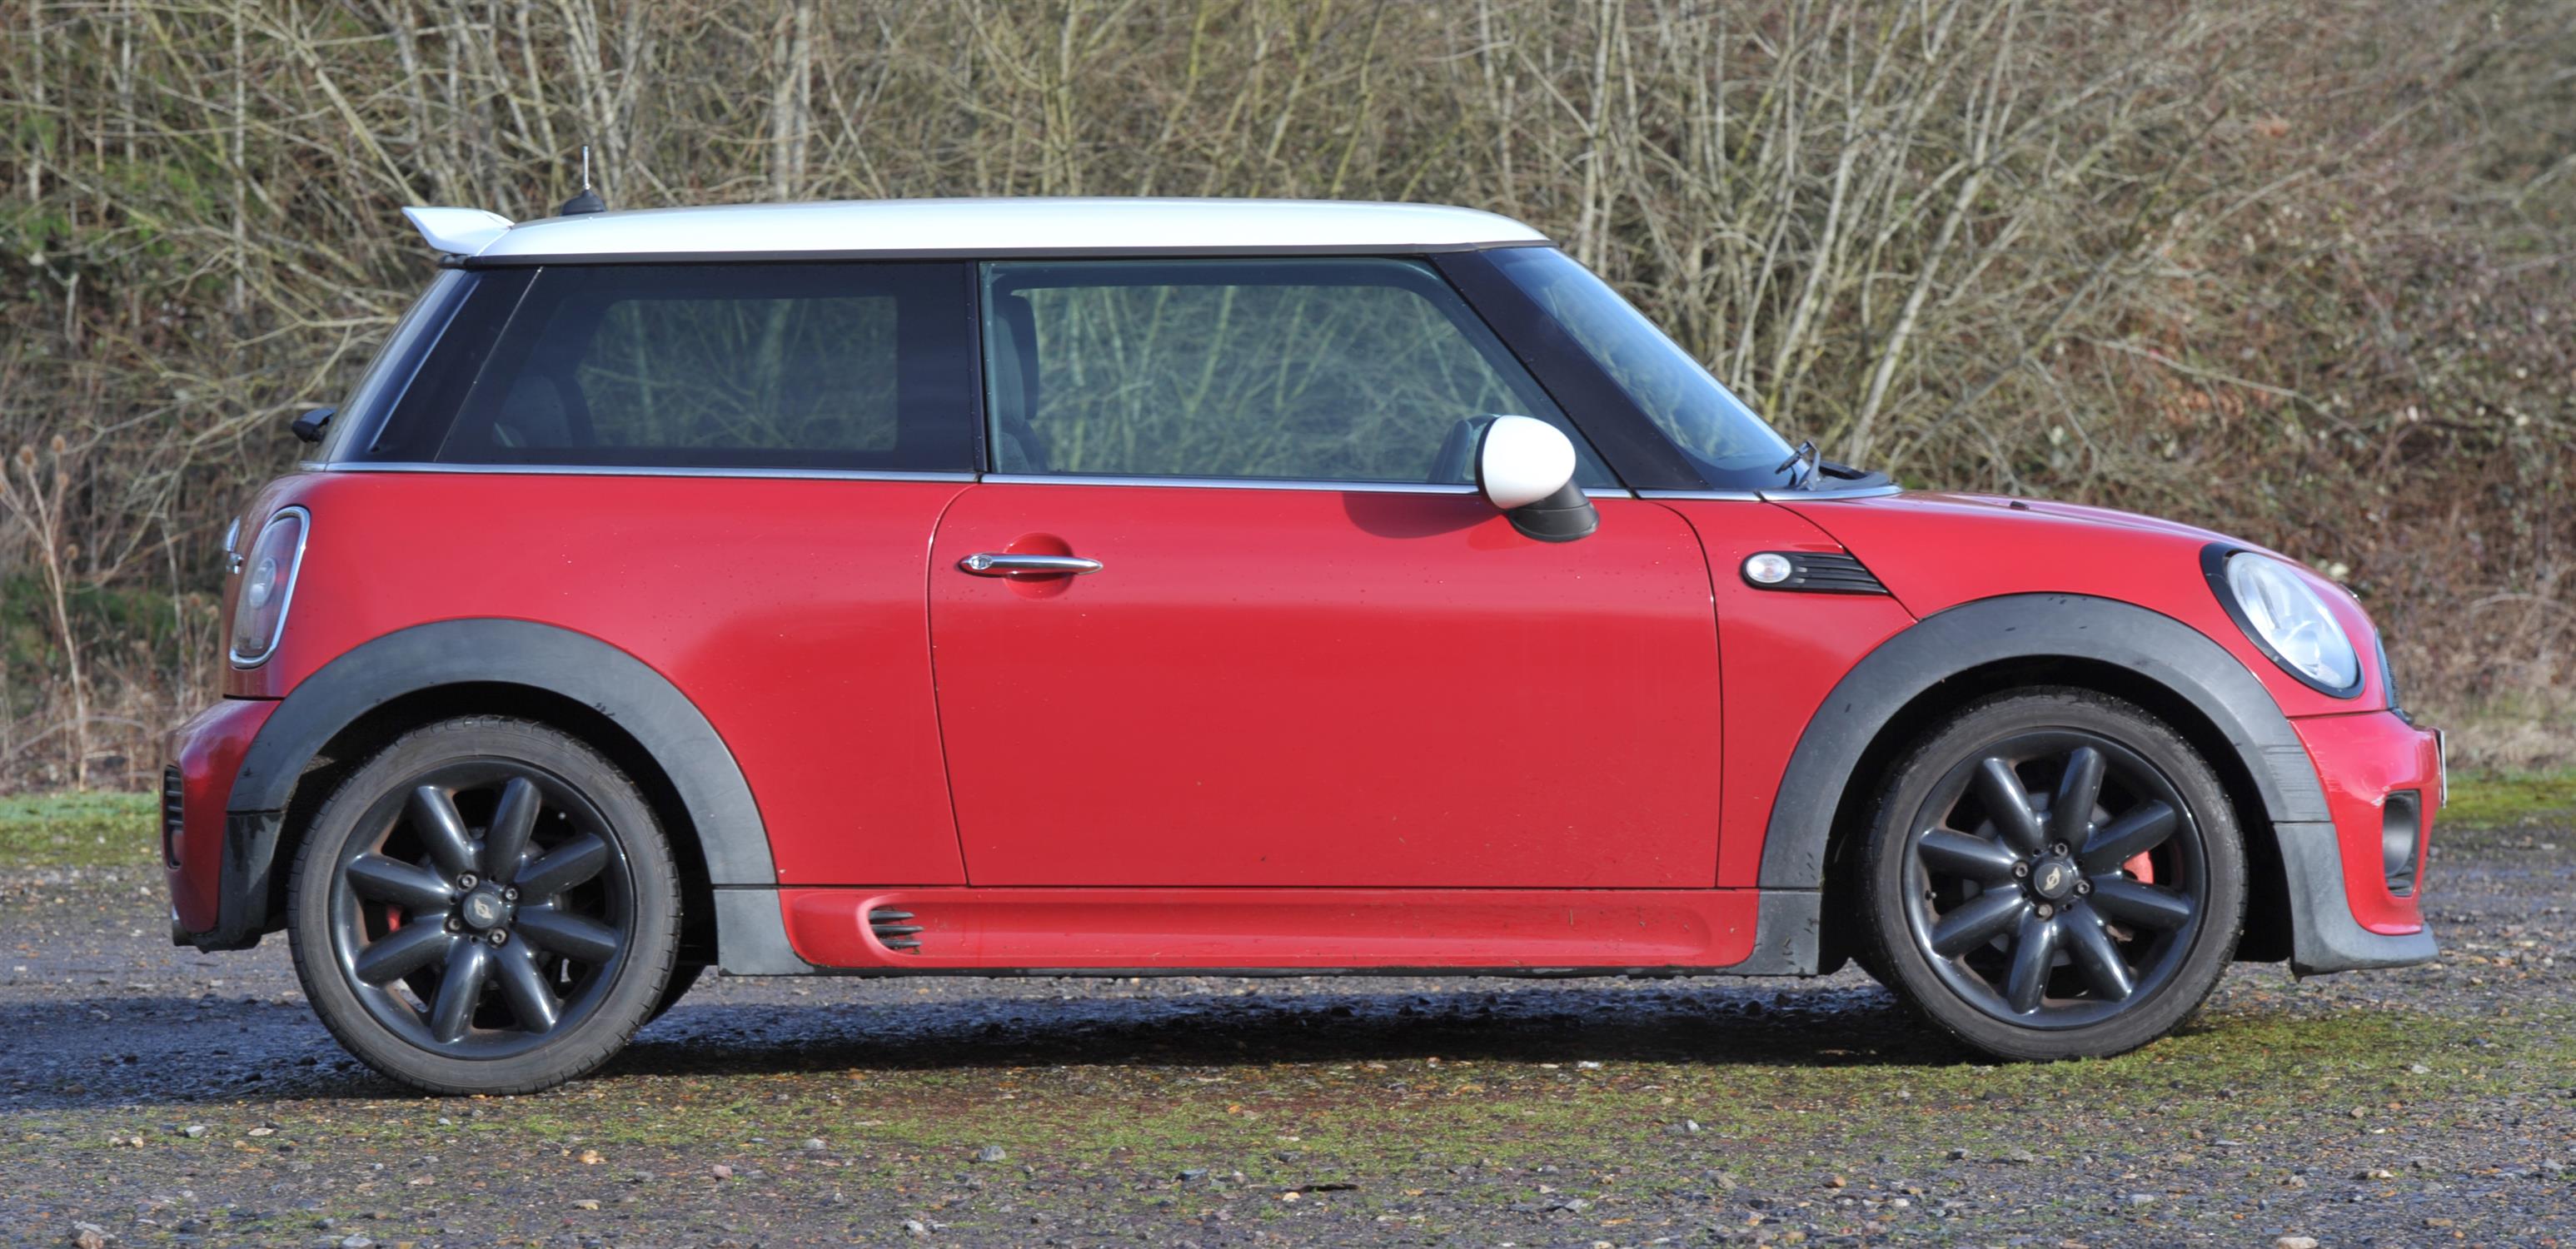 2007 Mini 1.6 Cooper Petrol with John Cooper Works Areo Body Kit. Registration number: SP57 GHH. - Image 3 of 14